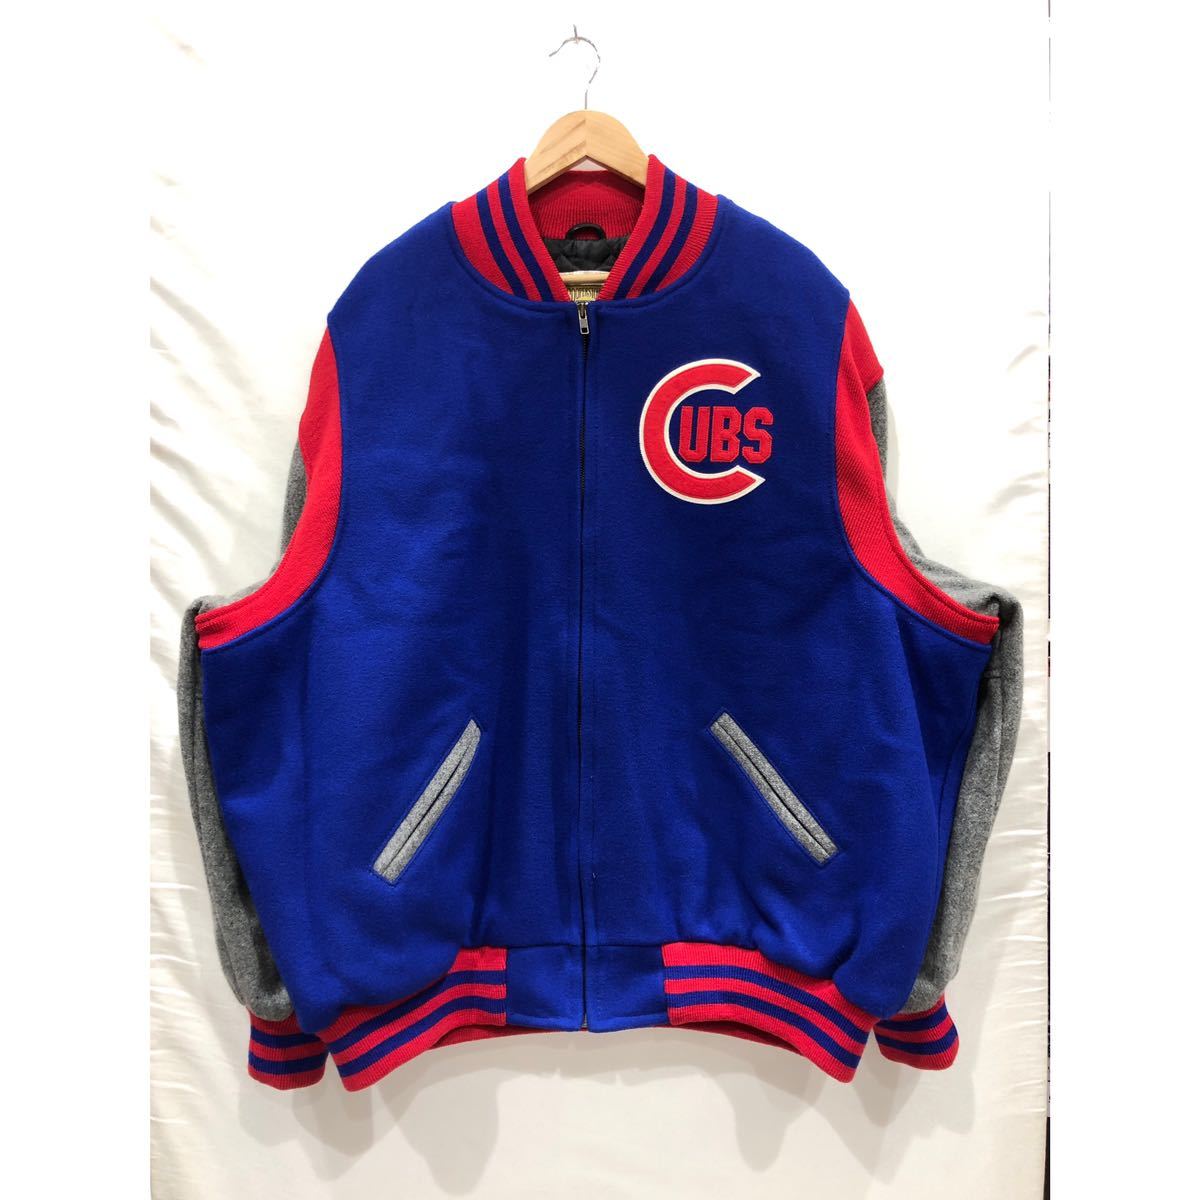 【mitchell and ness】ミッチェルアンドネス cubs jacket cooperstown authentic collection スタジャン XXL ブルー レッド ts202401_画像1